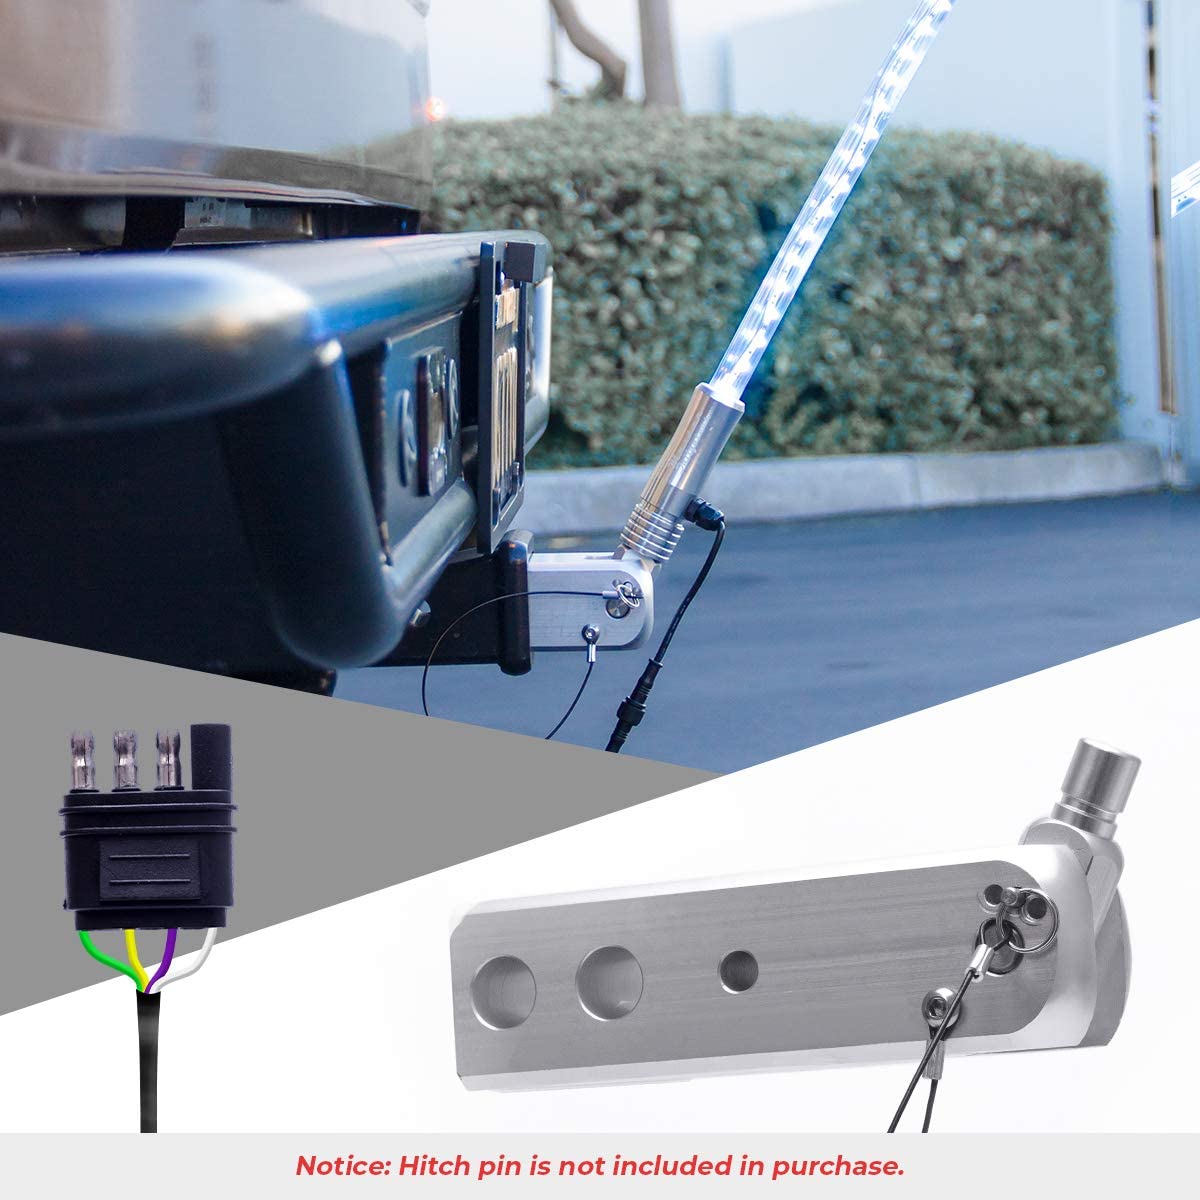 Master Tailgaters Truck Flag Pole 5' foot + Hitch Mount - Waterproof, Remote, 22 Functions LED Light